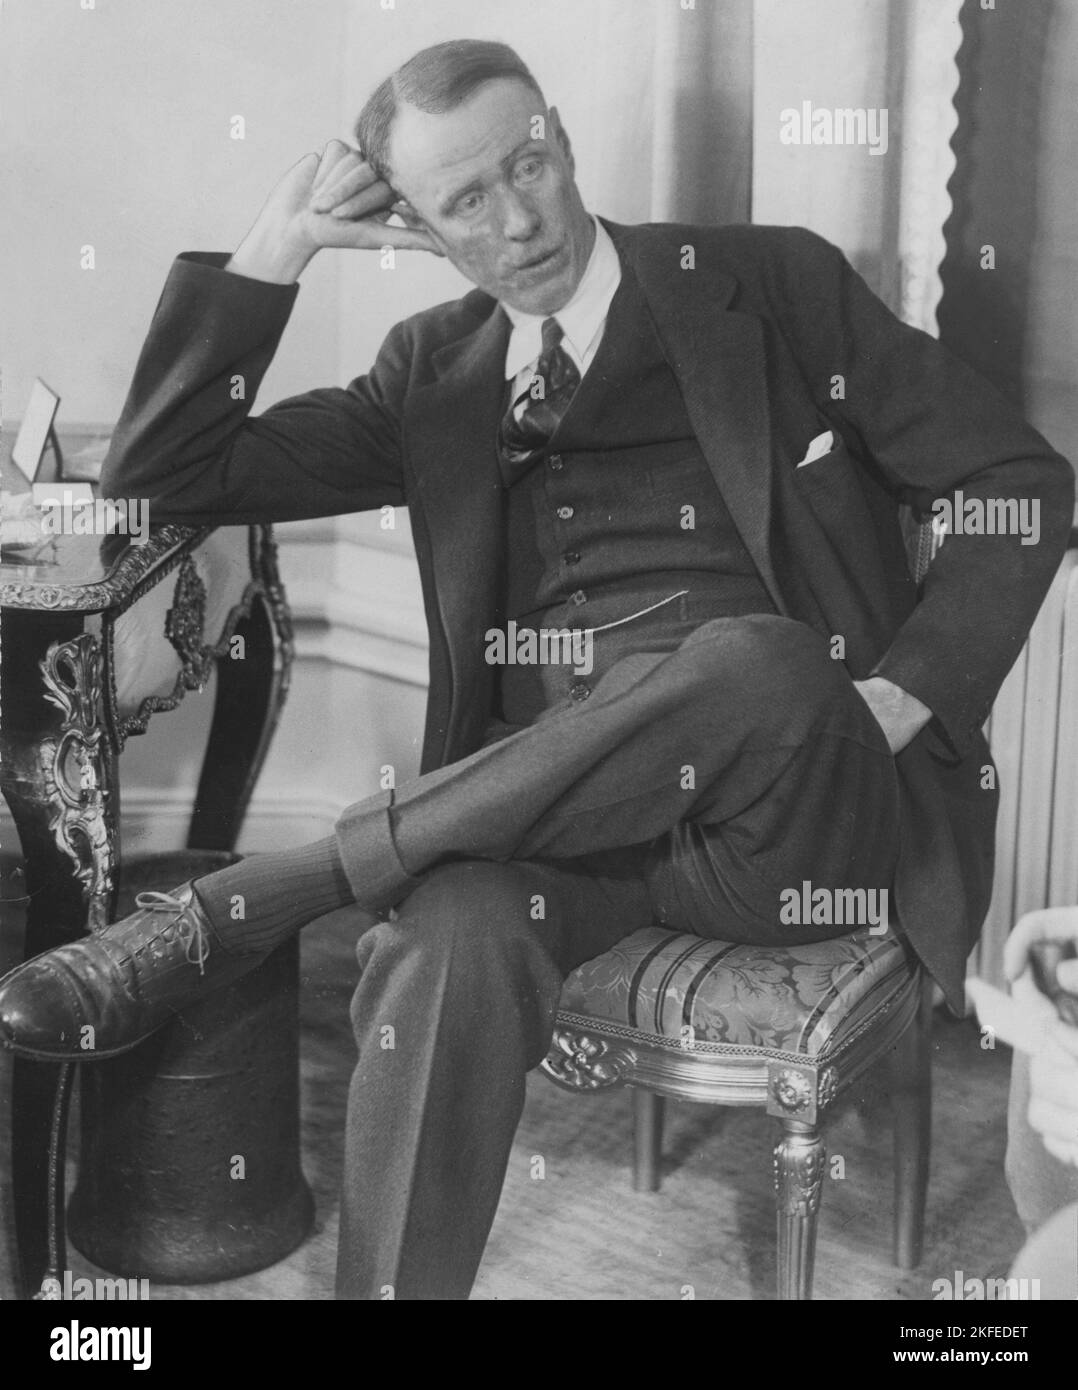 Sinclair Lewis. American writer and playwright. Born february 7 1885 - january 10 1951. He became the first writer from the United States to recieve the Nobel Prize in Literature. He is best known for his novels Main street, Babbitt, Arrowsmith, Elmer Gantry, Dodsworth and It Can't happen here. 1930 Stock Photo